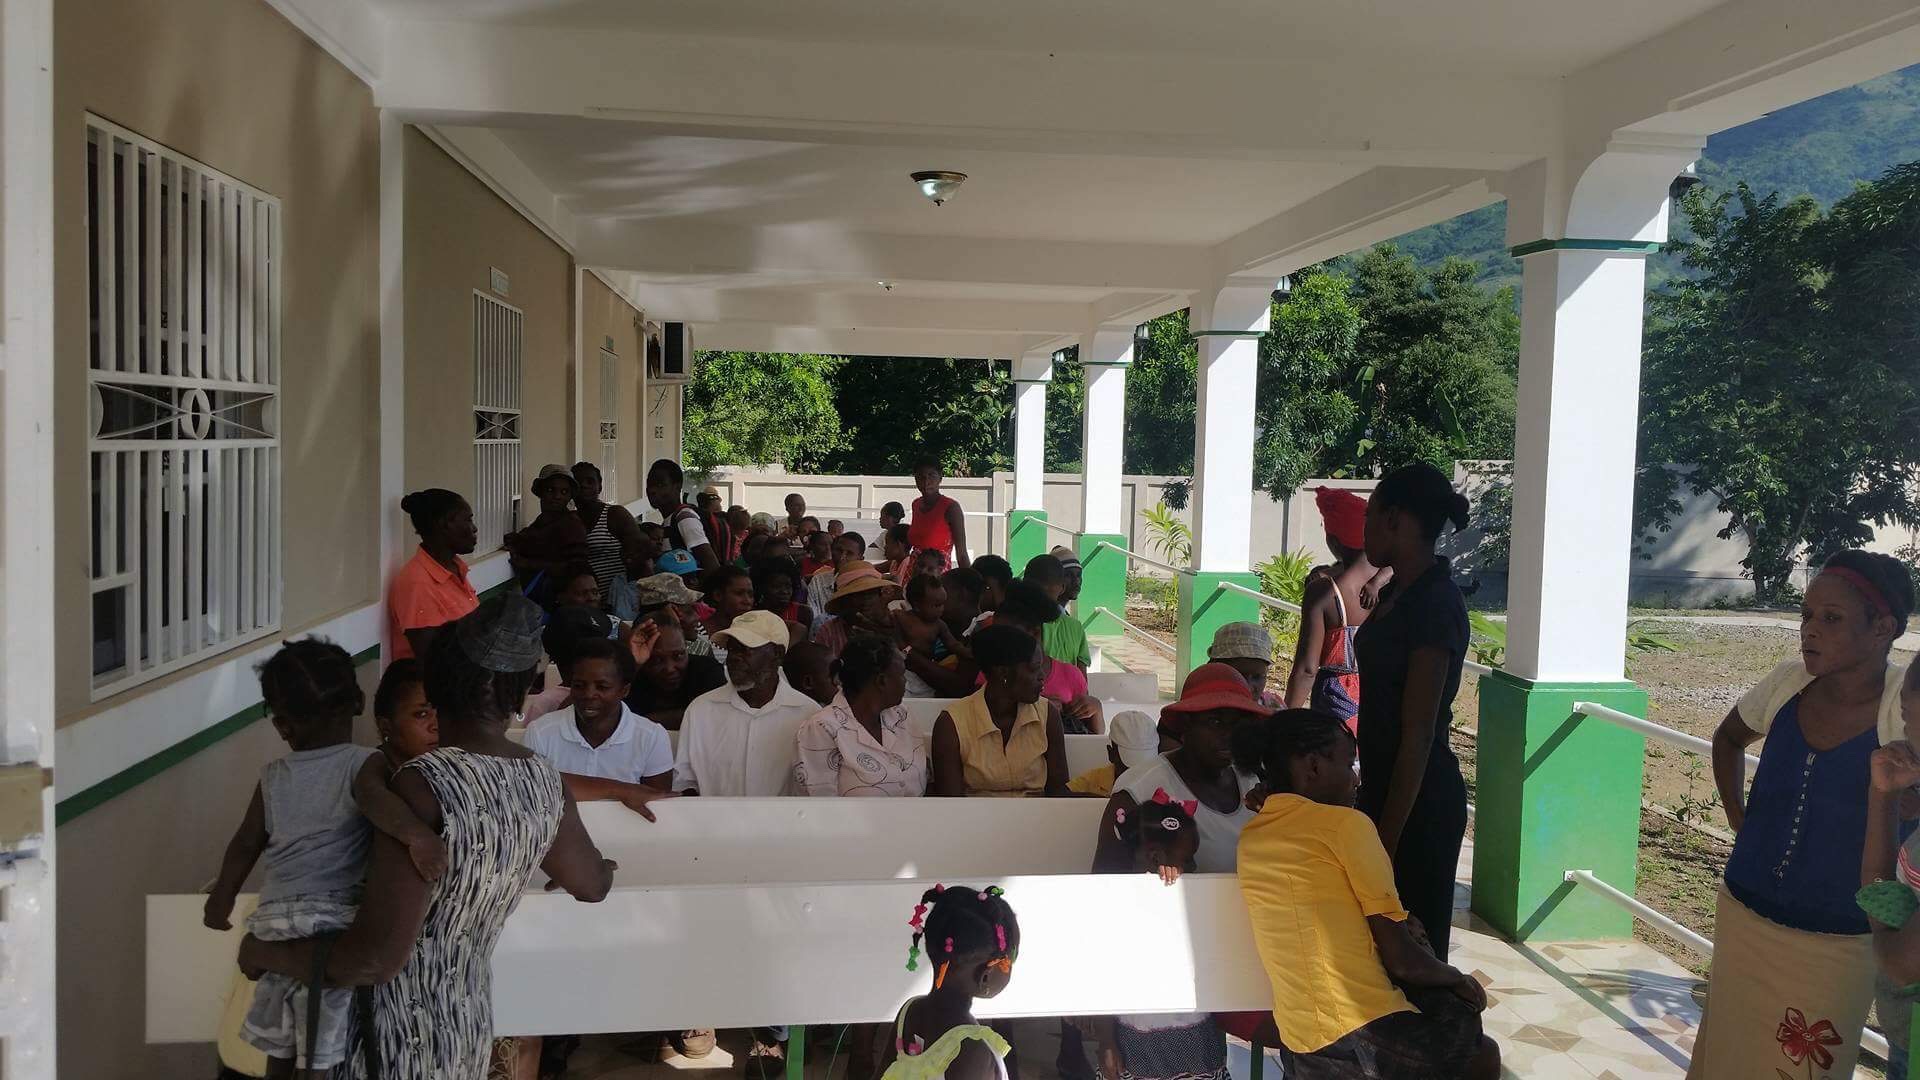  Crowds gathered to receive medical care on opening day at the newly opened CHIDA Hospital in Cap Haitien, Haiti. 